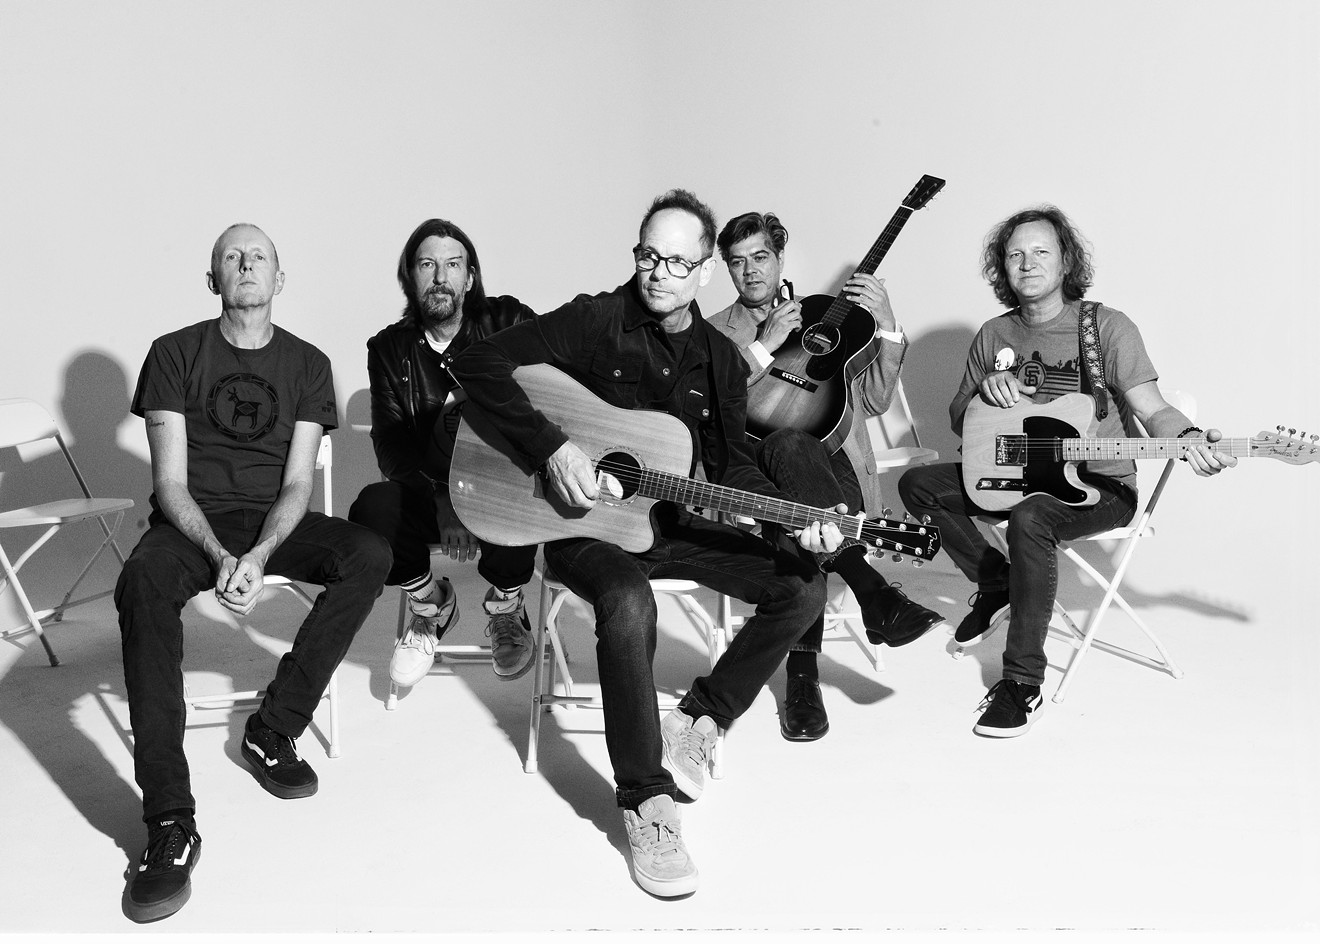 Gin Blossoms are scheduled to perform on Tuesday, August 13, at Comerica Theatre.